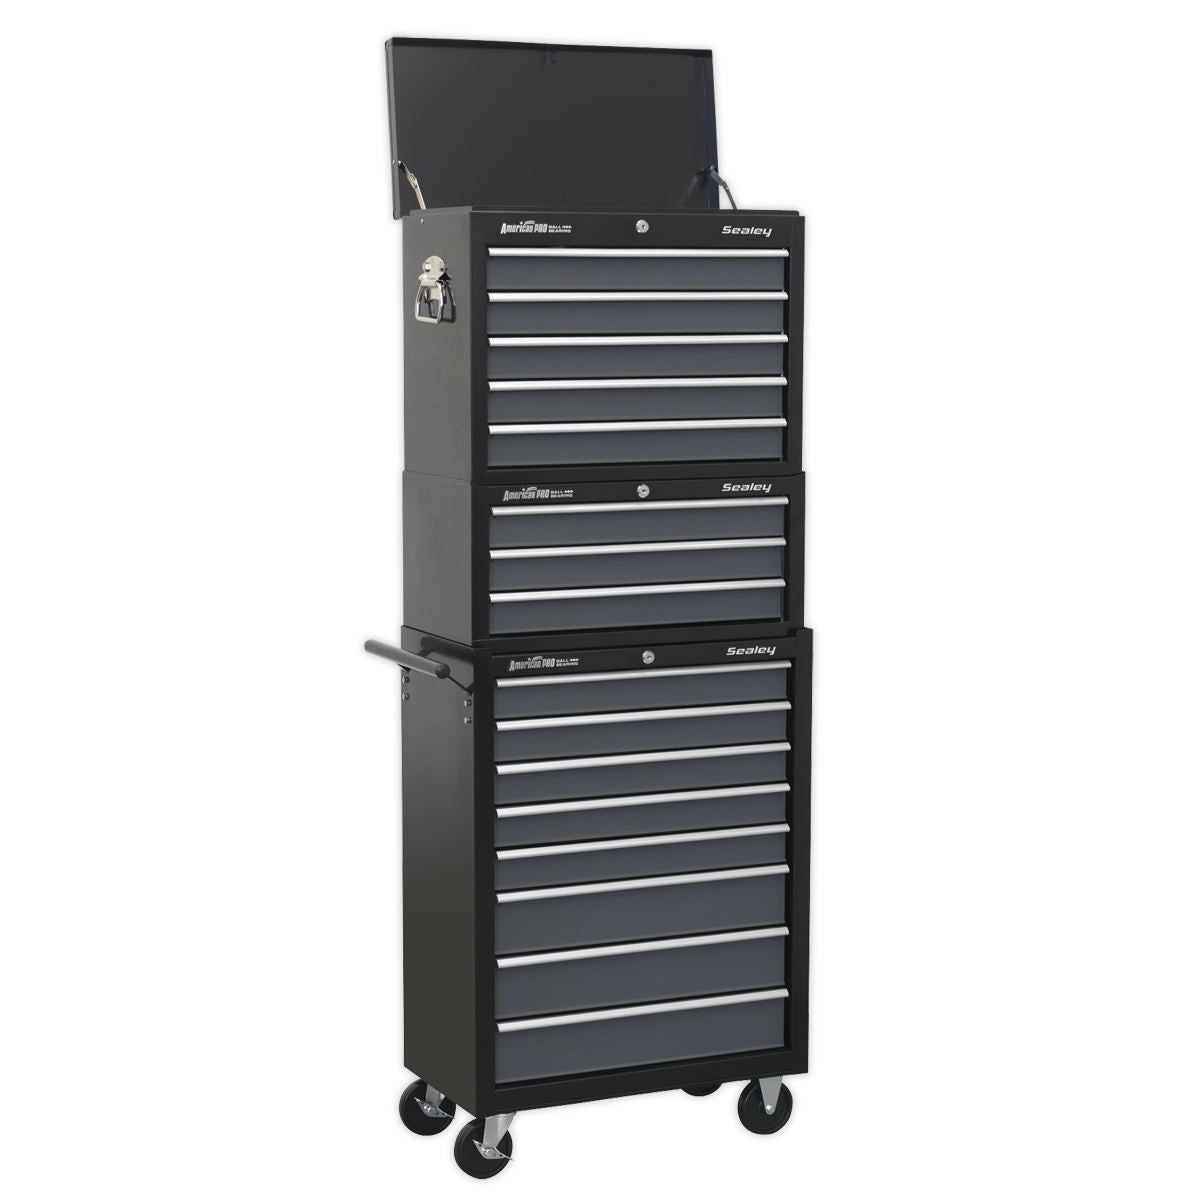 Sealey American Pro Tool Chest Combination 16 Drawer with Ball-Bearing Slides - Black/Grey